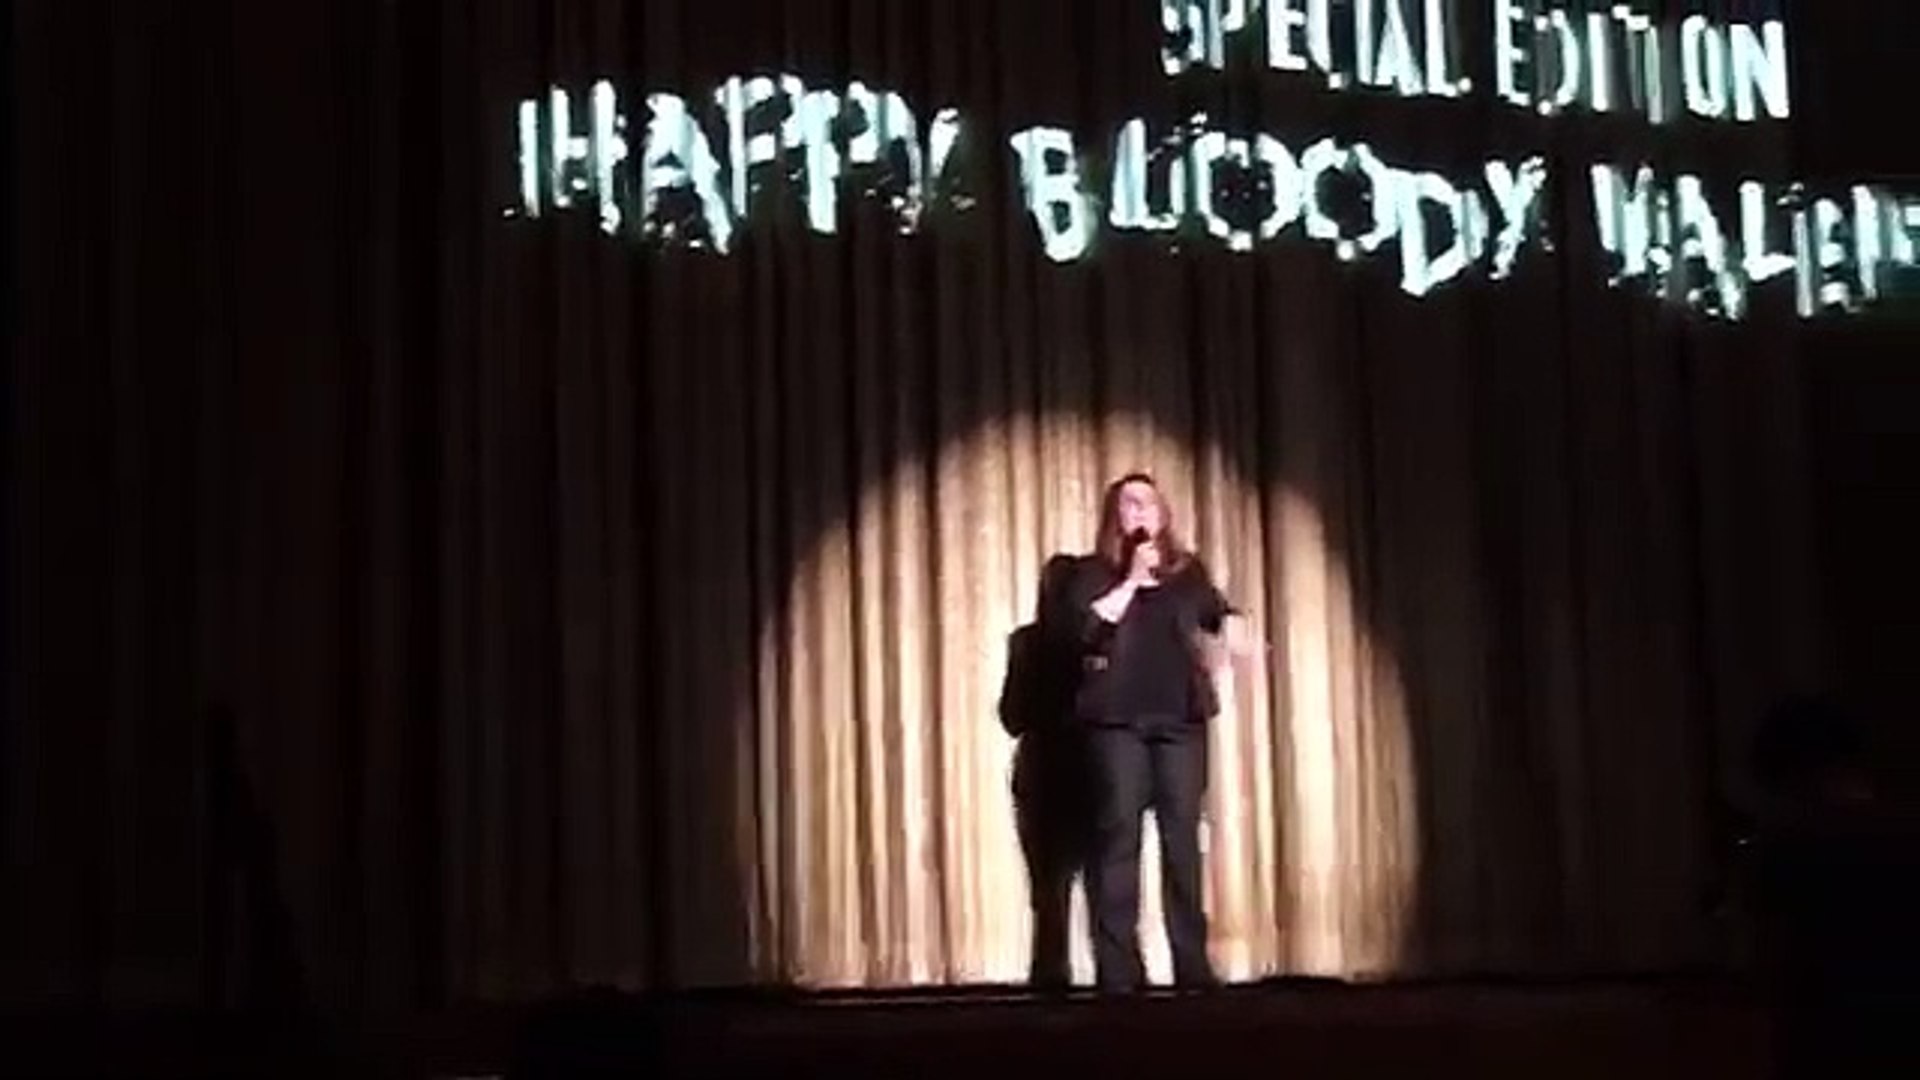 Jodie Foster speaks at Silence of the Lambs screening